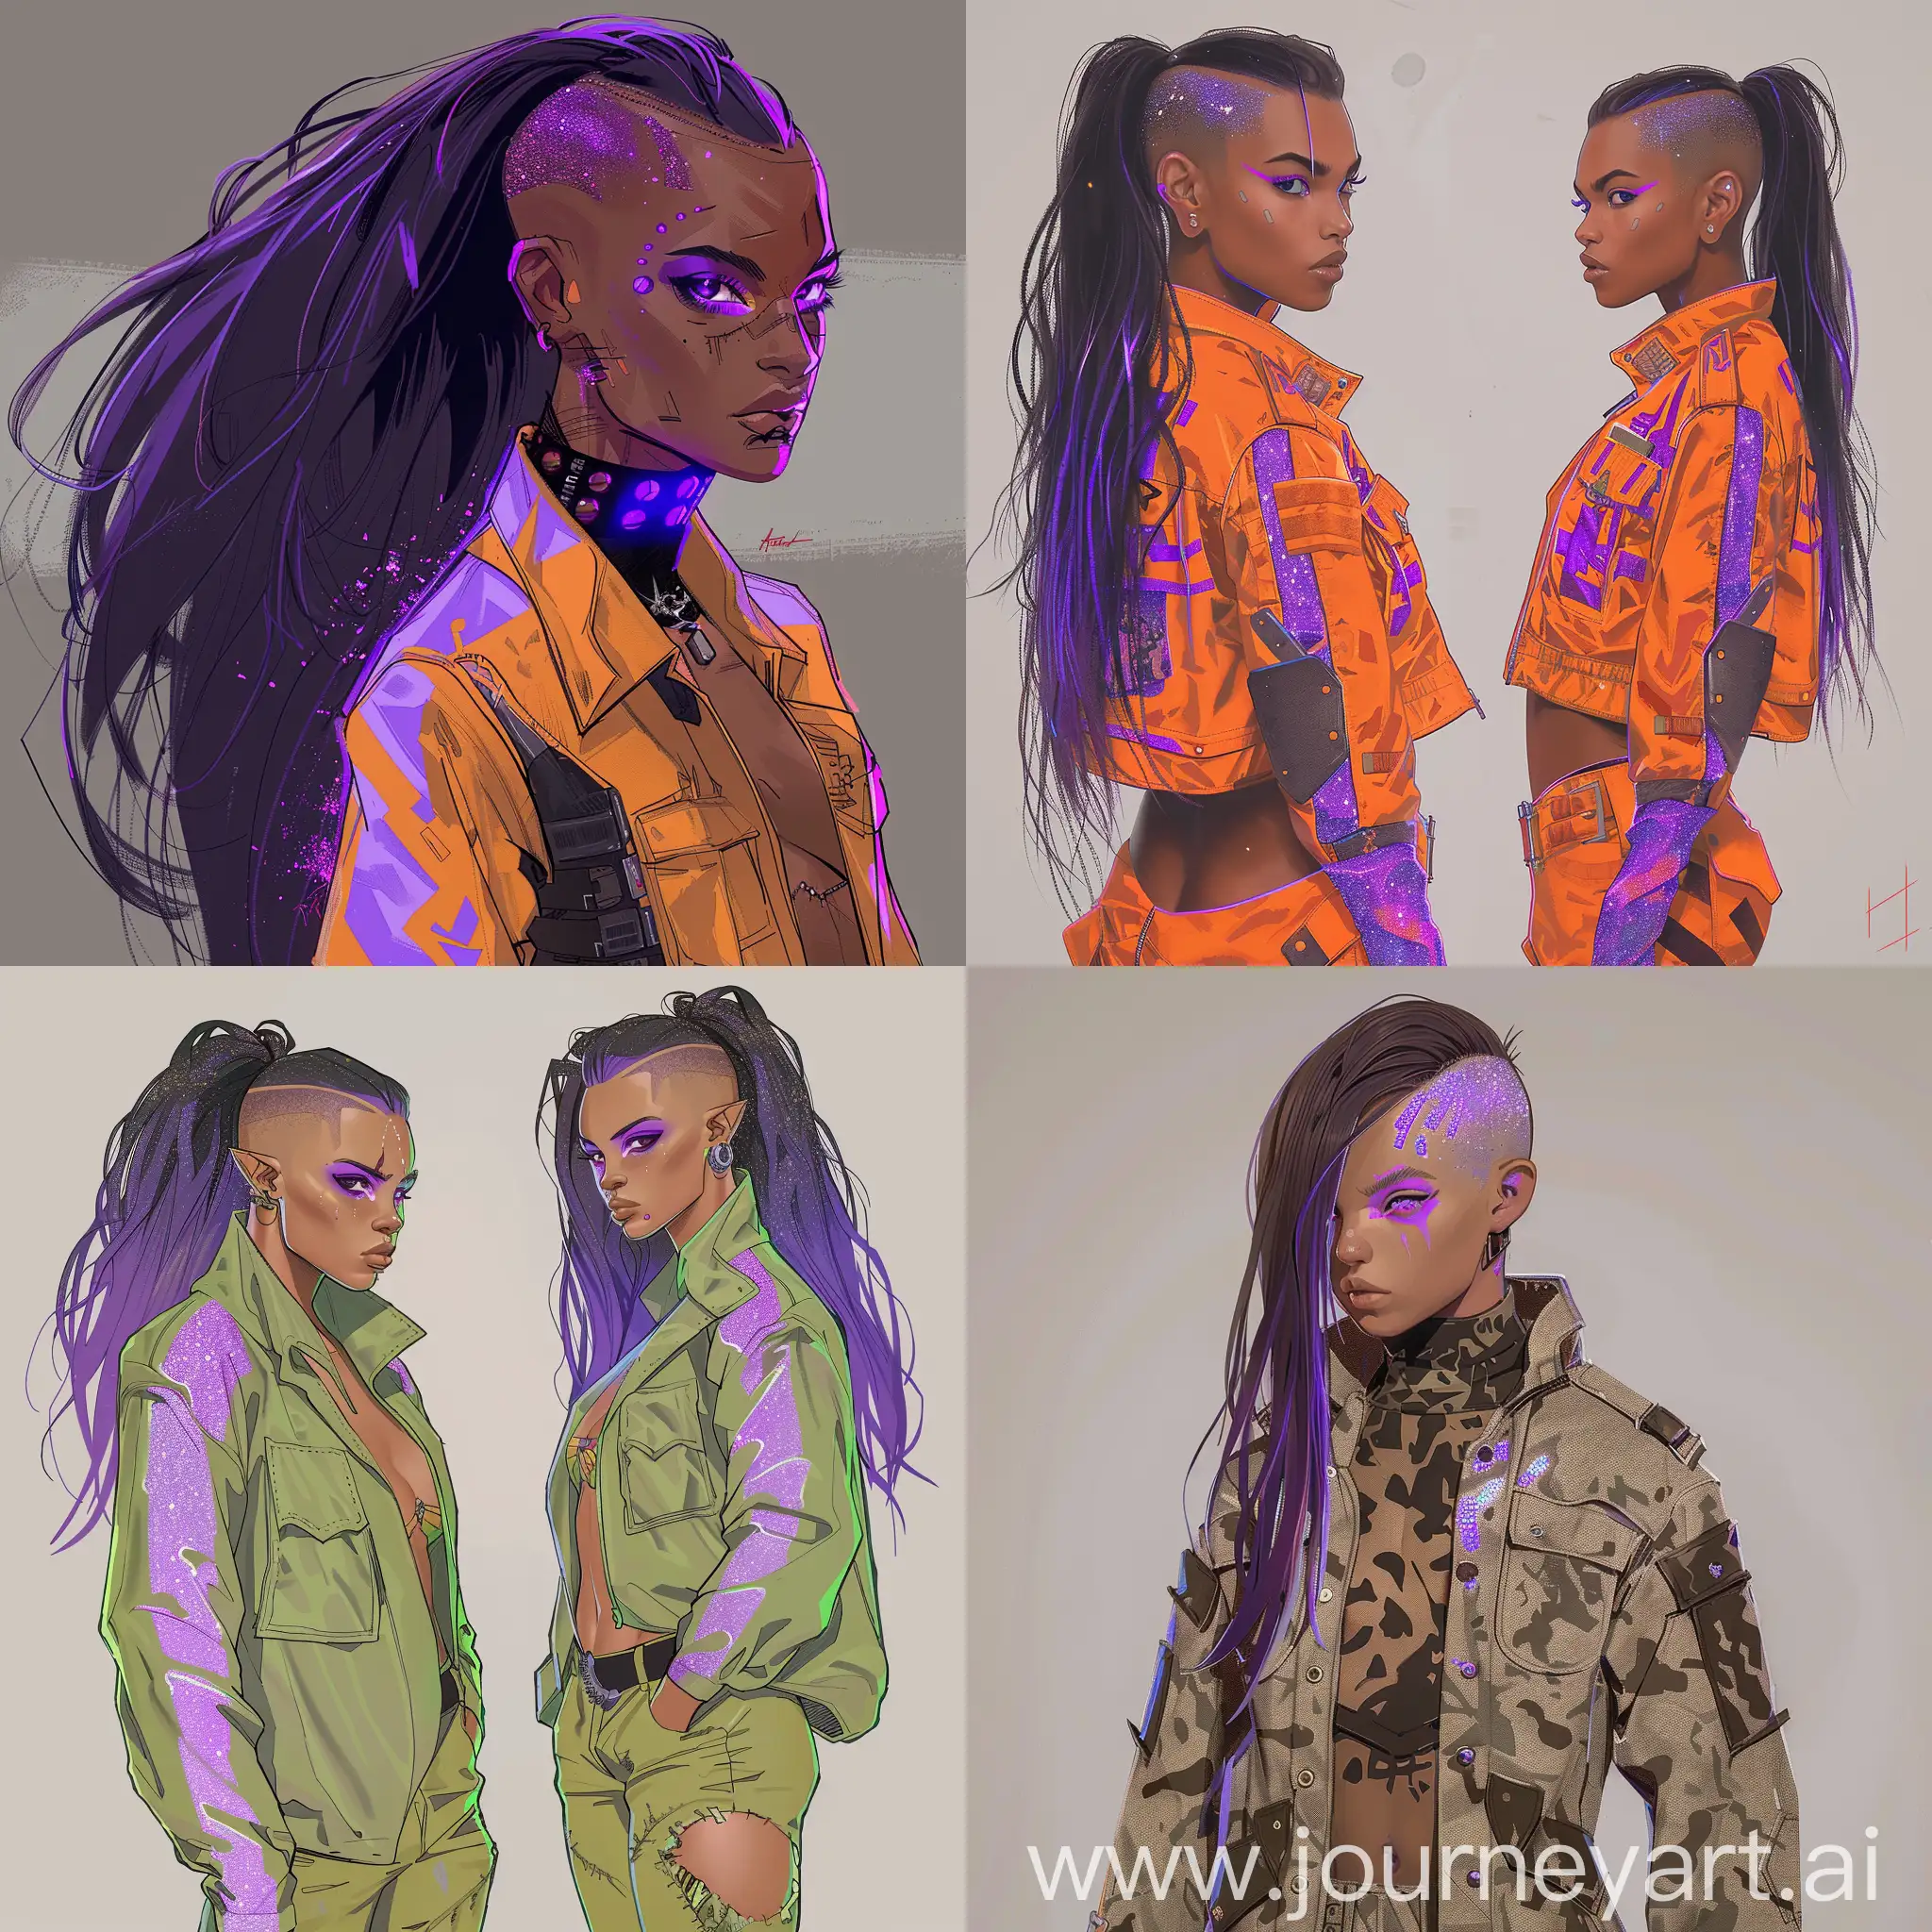 Militaristic-Female-Character-with-Neon-Purple-Hair-and-Unusually-Shaped-Irises